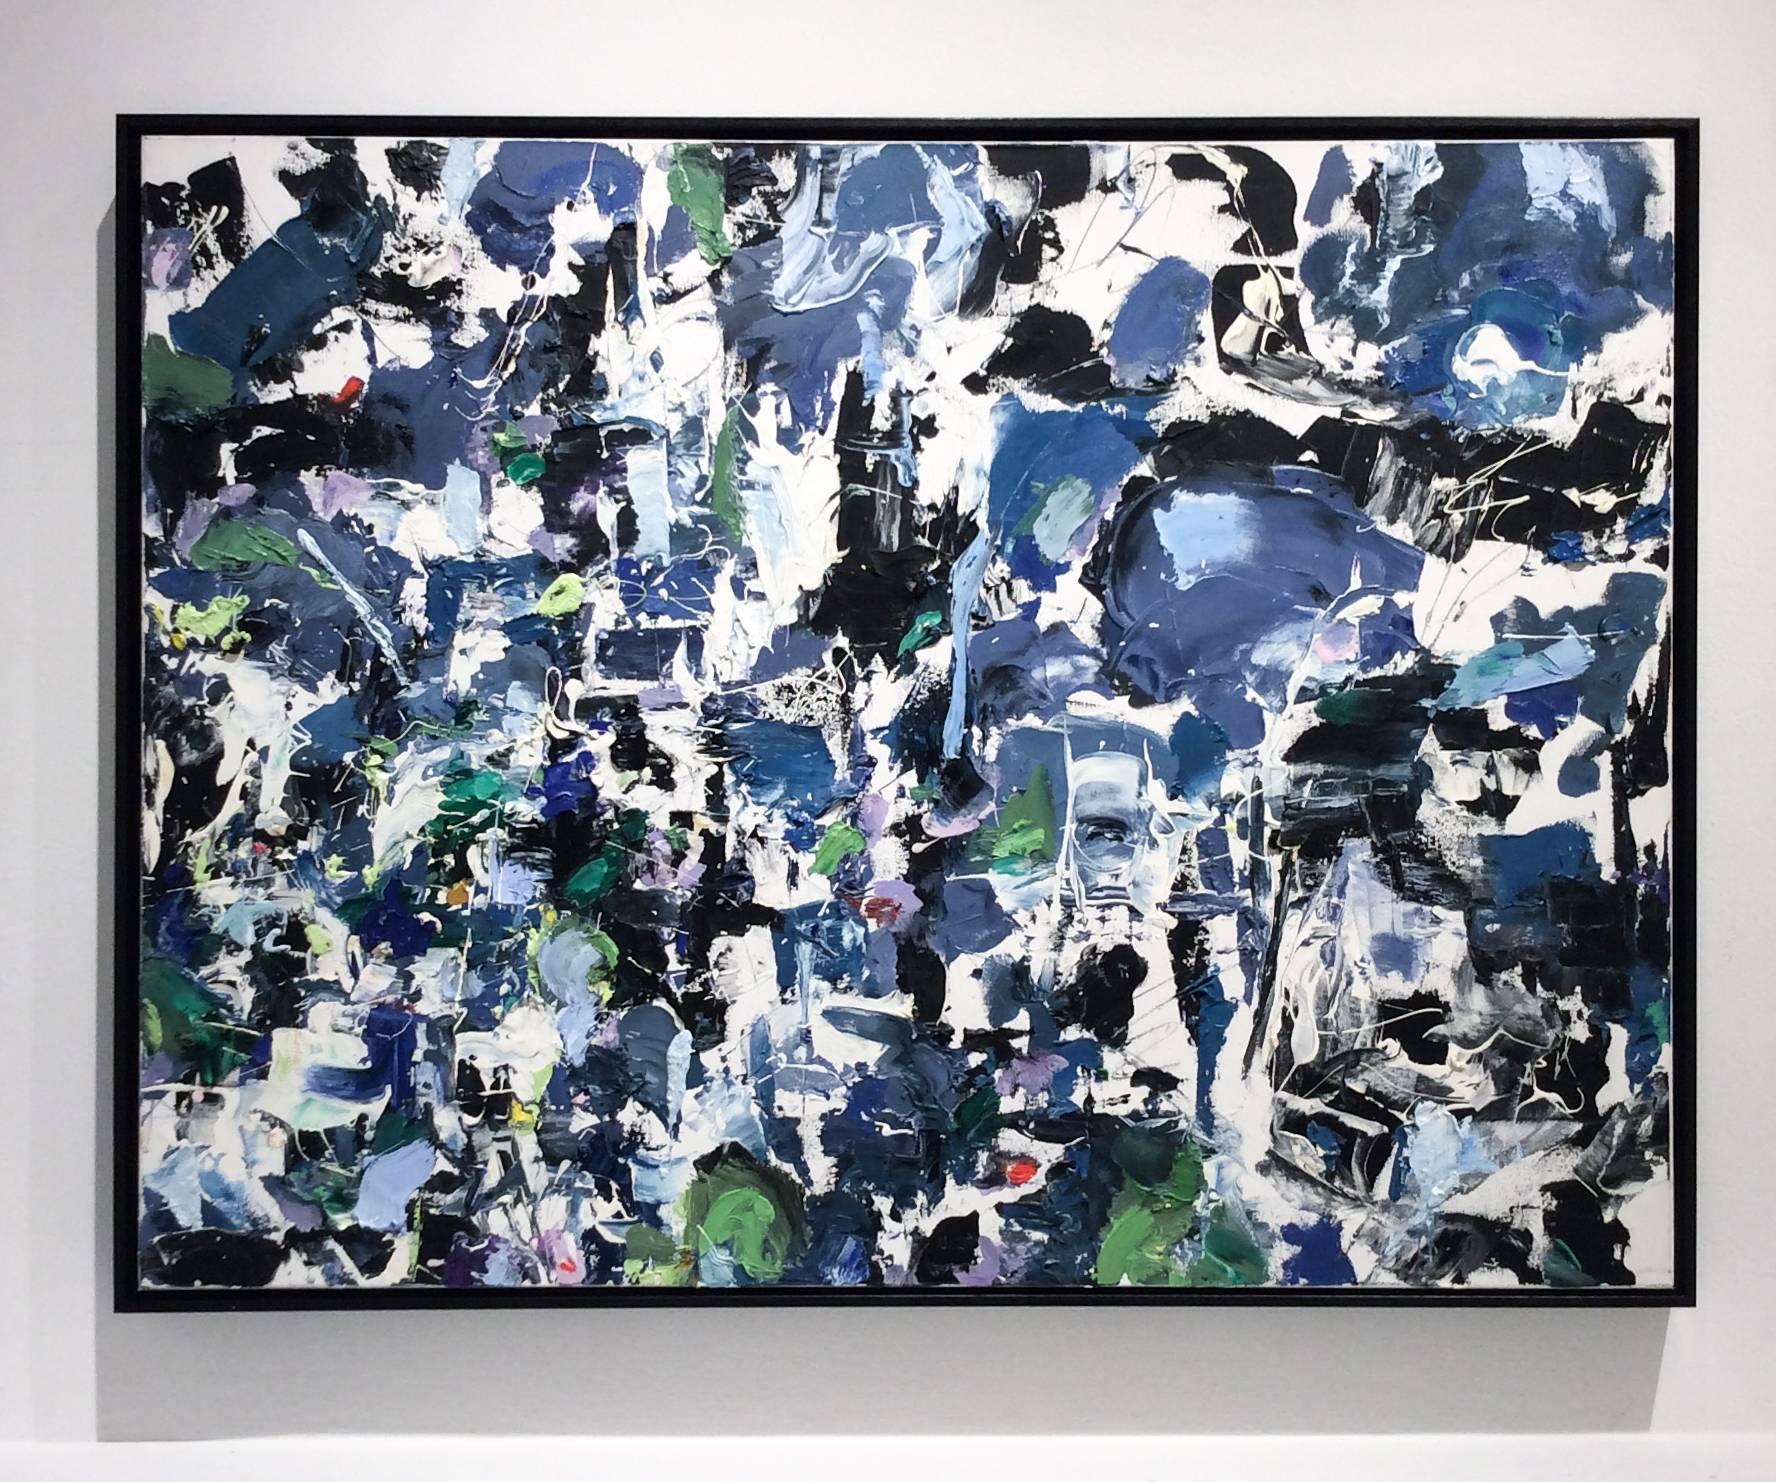 Air Bluing with Afternoon (Large Abstract Expressionist Painting on Canvas) by Adam Cohen
Abstract expressionist painting on canvas in blue, white, black, and violet
30 x 40 inches on stretched canvas, signed on front and dated on reverse
Can be